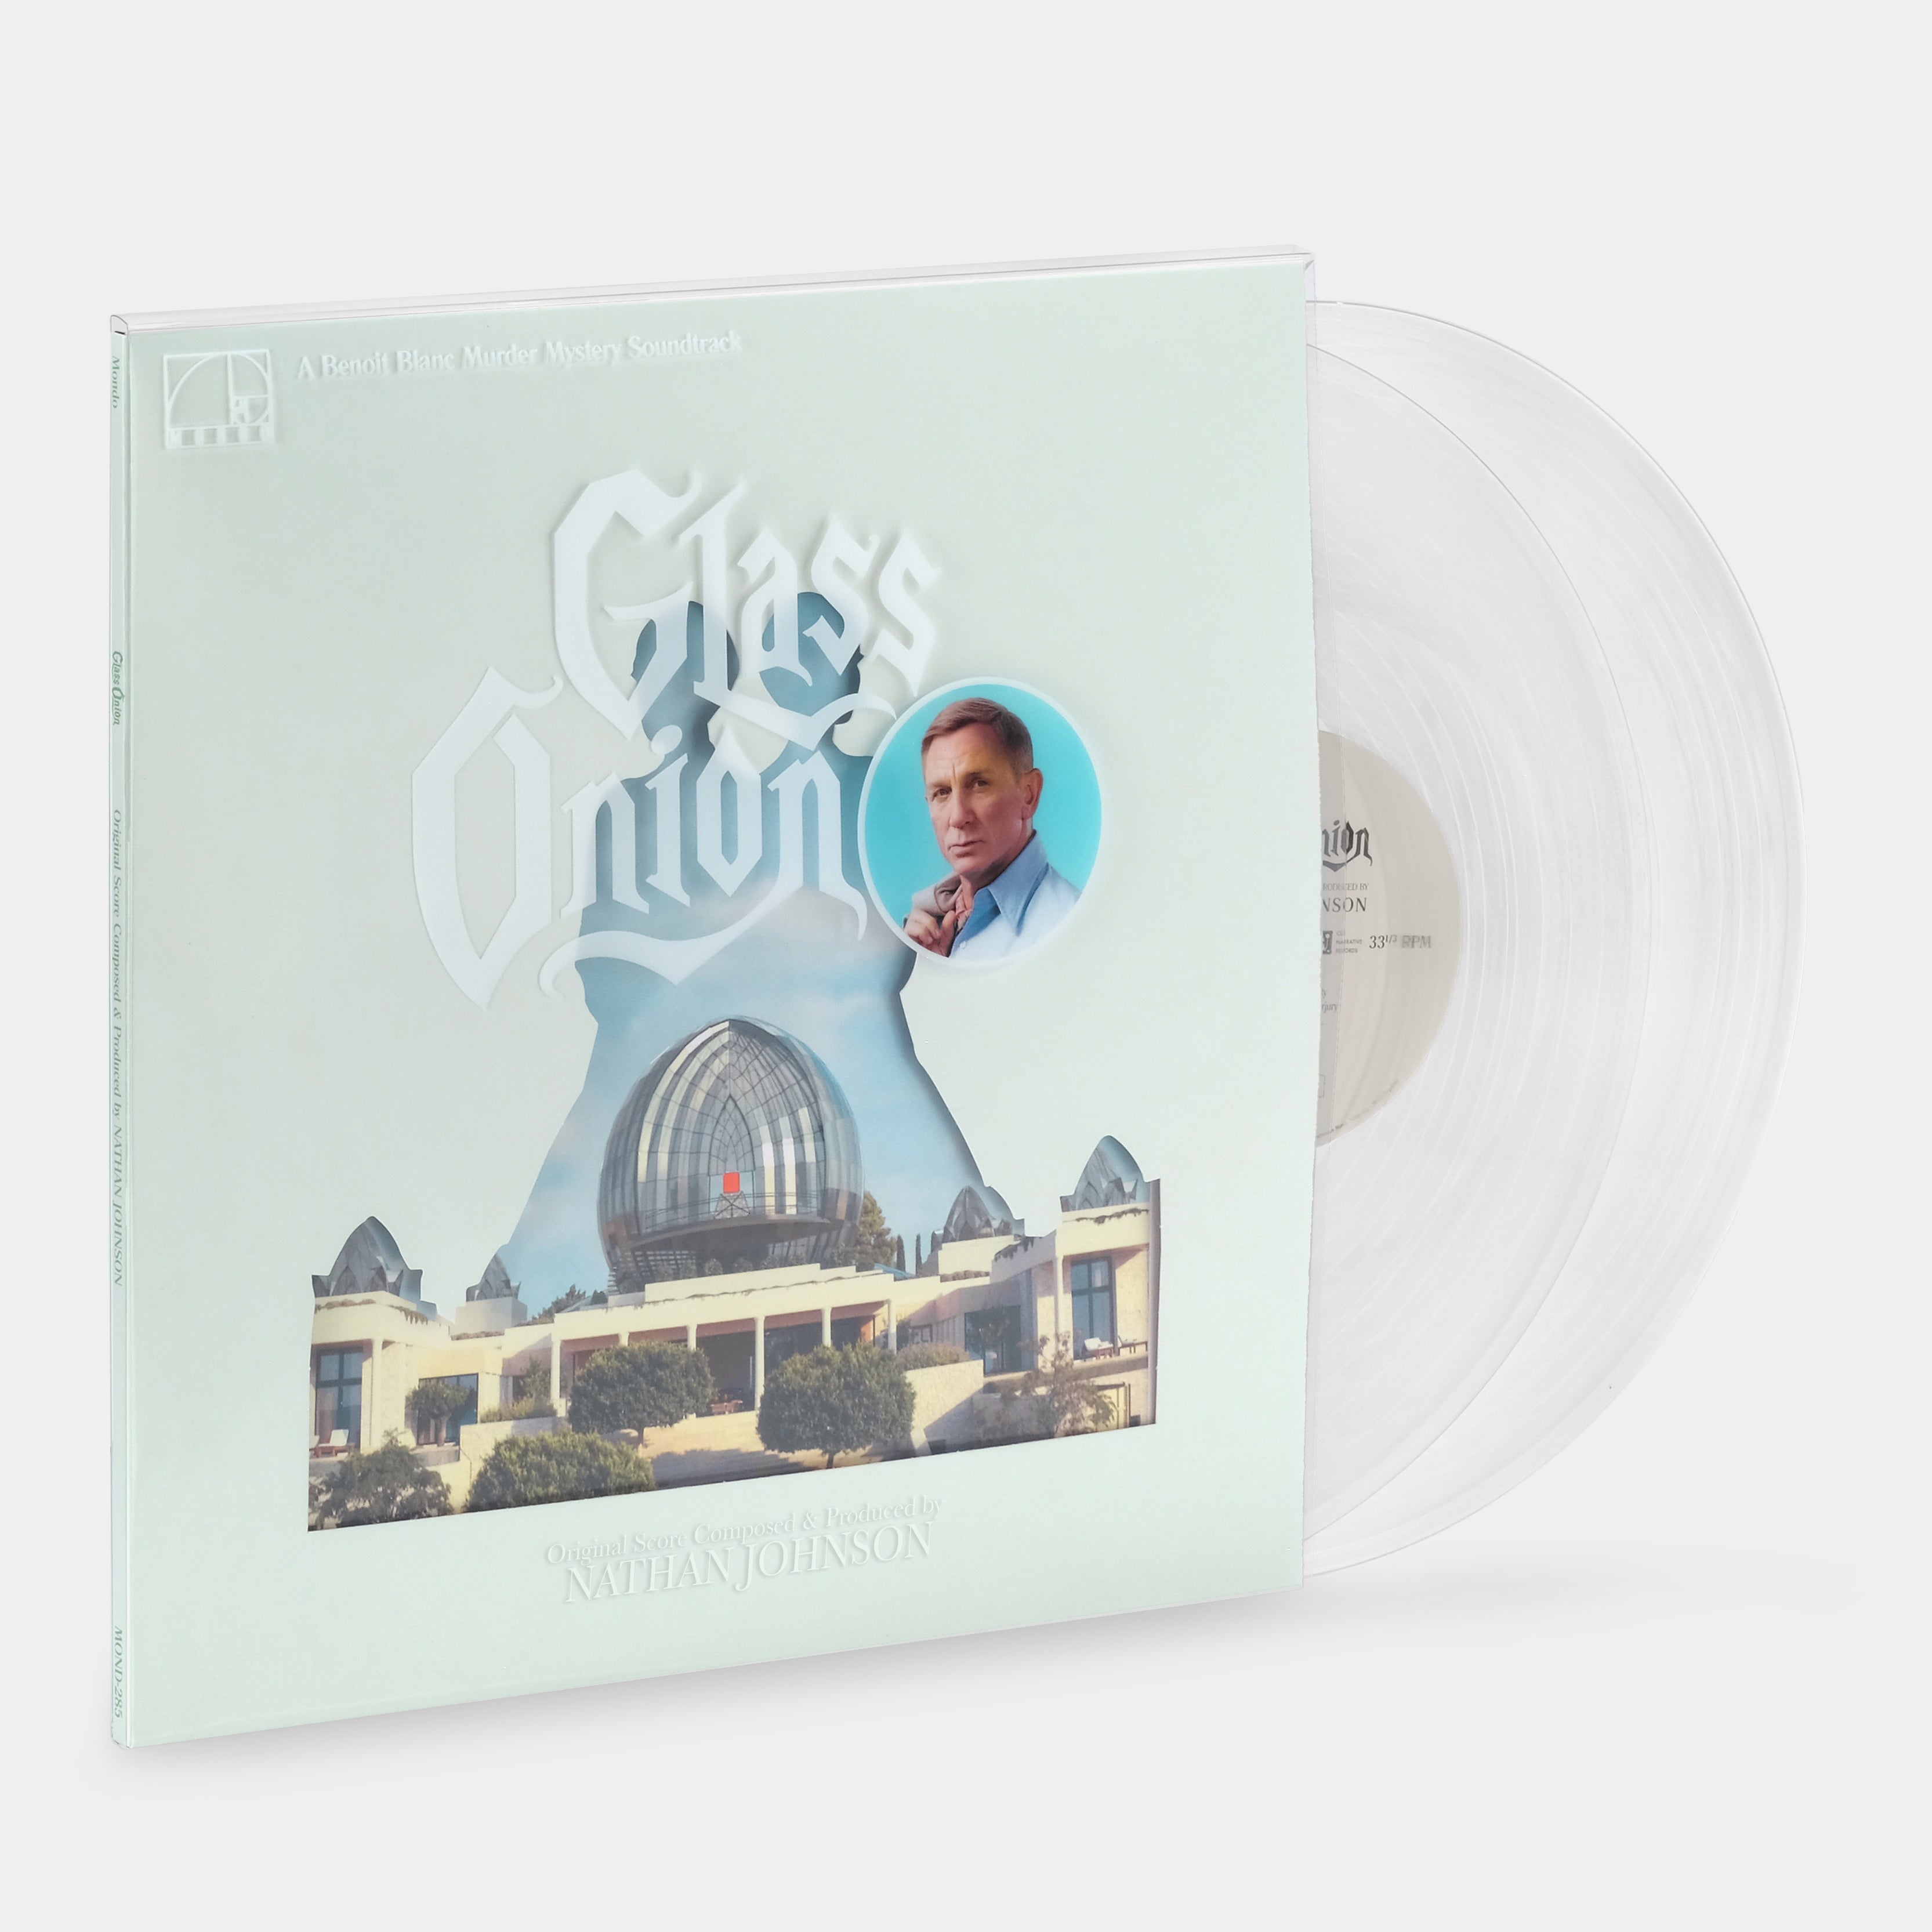 Nathan Johnson - Glass Onion: A Knives Out Mystery (Original Motion Picture Soundtrack) 2xLP Crystal Clear Vinyl Record